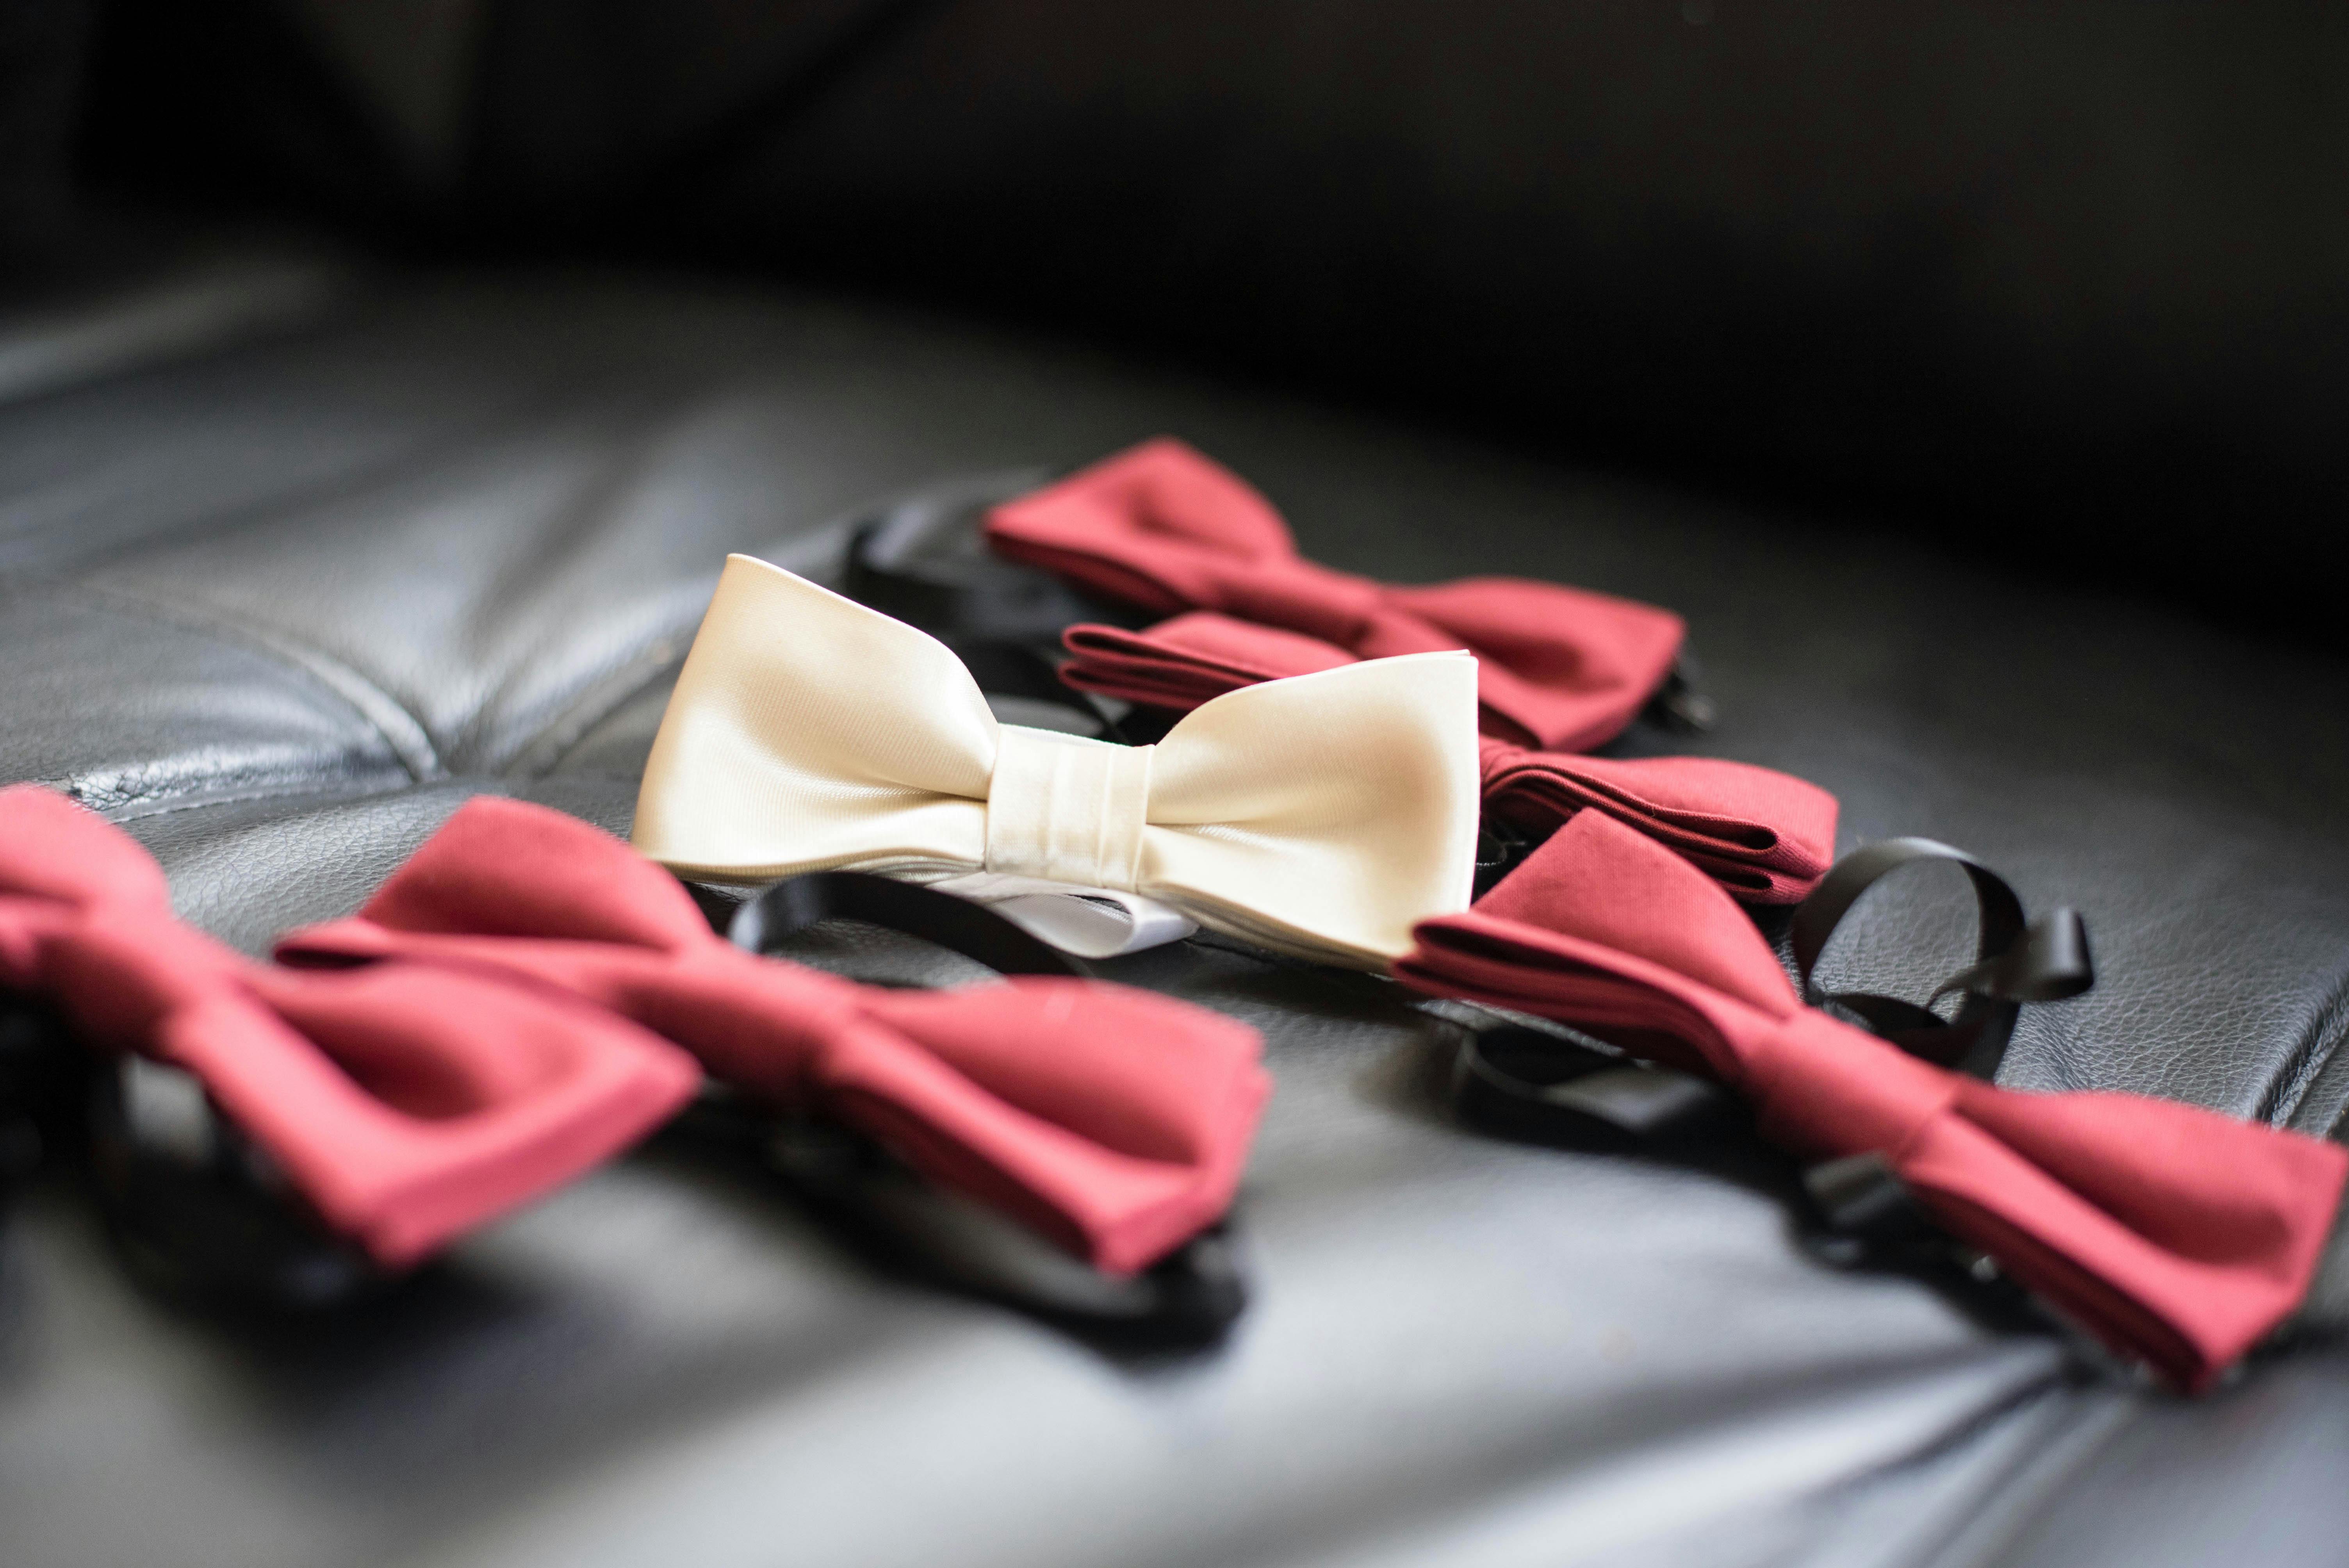 15,000+ Red Bow Tie Stock Photos, Pictures & Royalty-Free Images